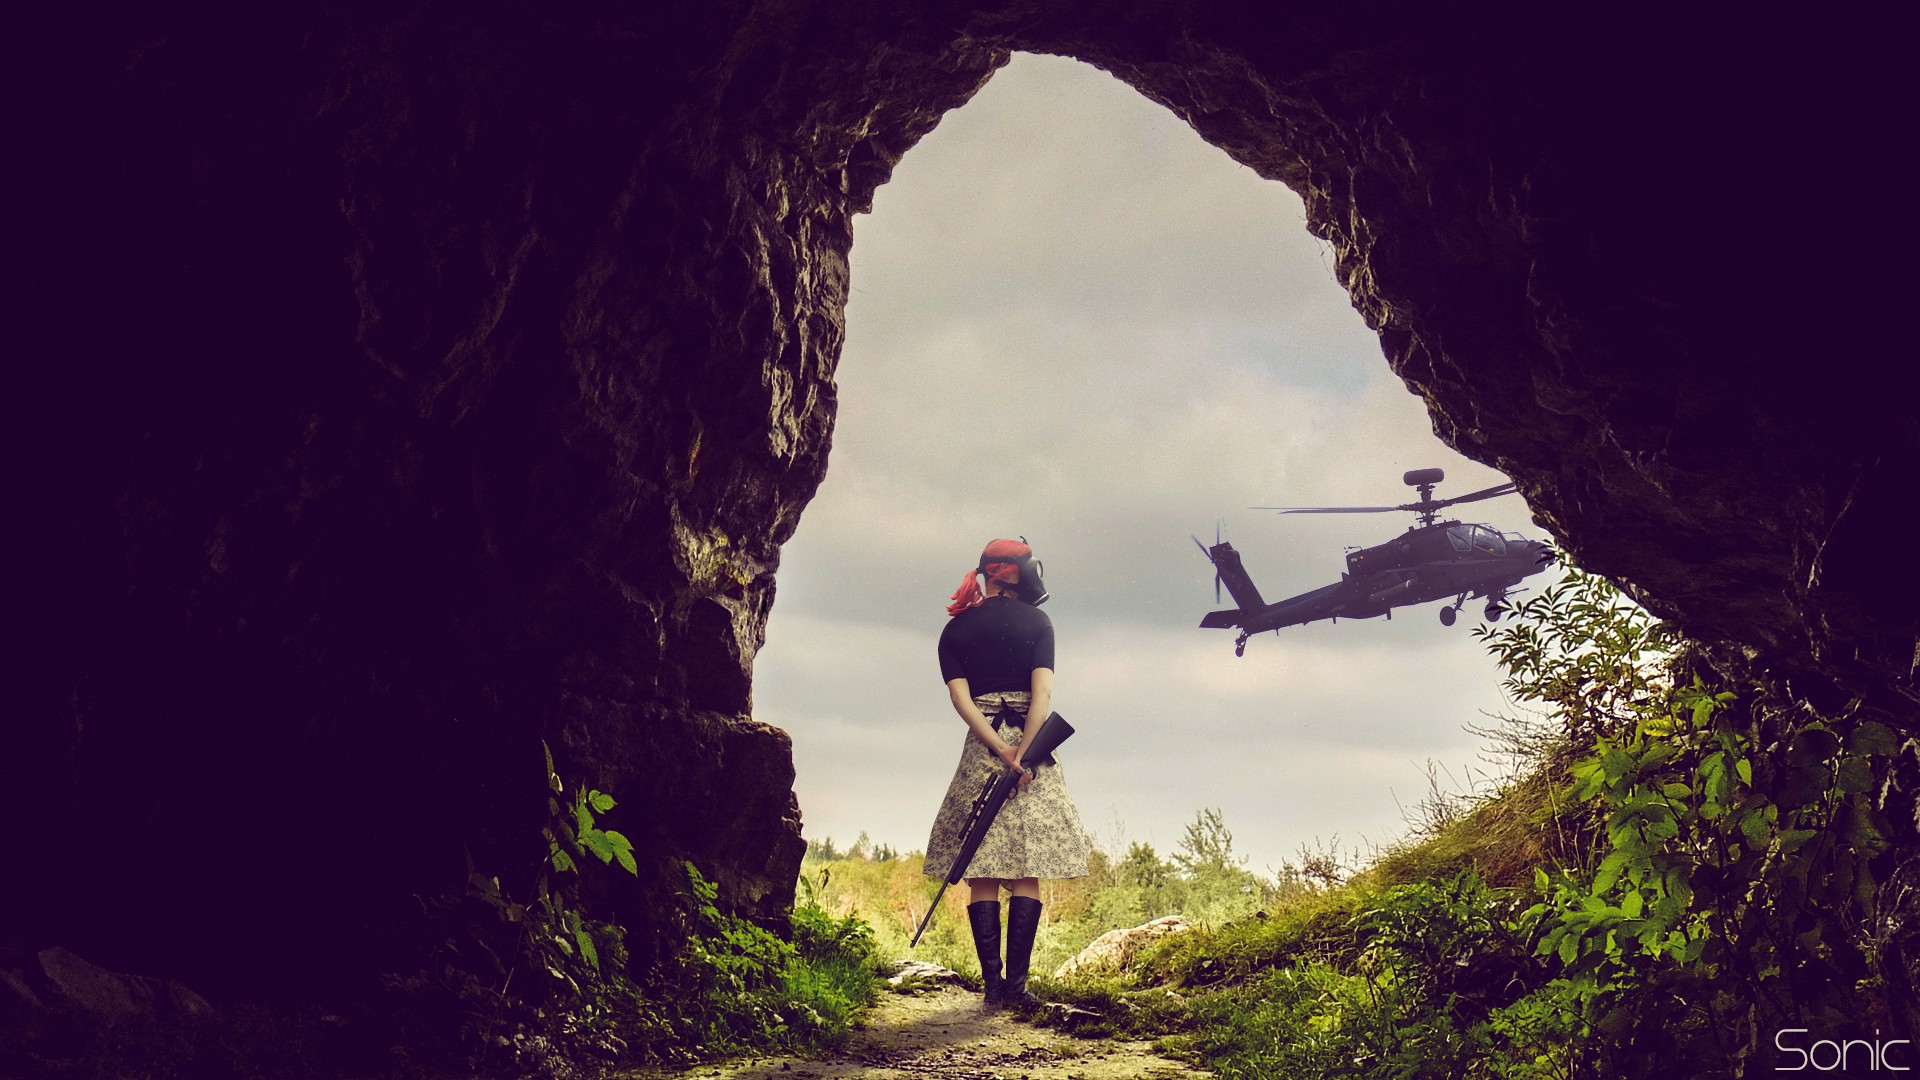 General 1920x1080 helicopters photo manipulation DeviantArt attack helicopters women rifles girls with guns gas masks vehicle military aircraft aircraft military